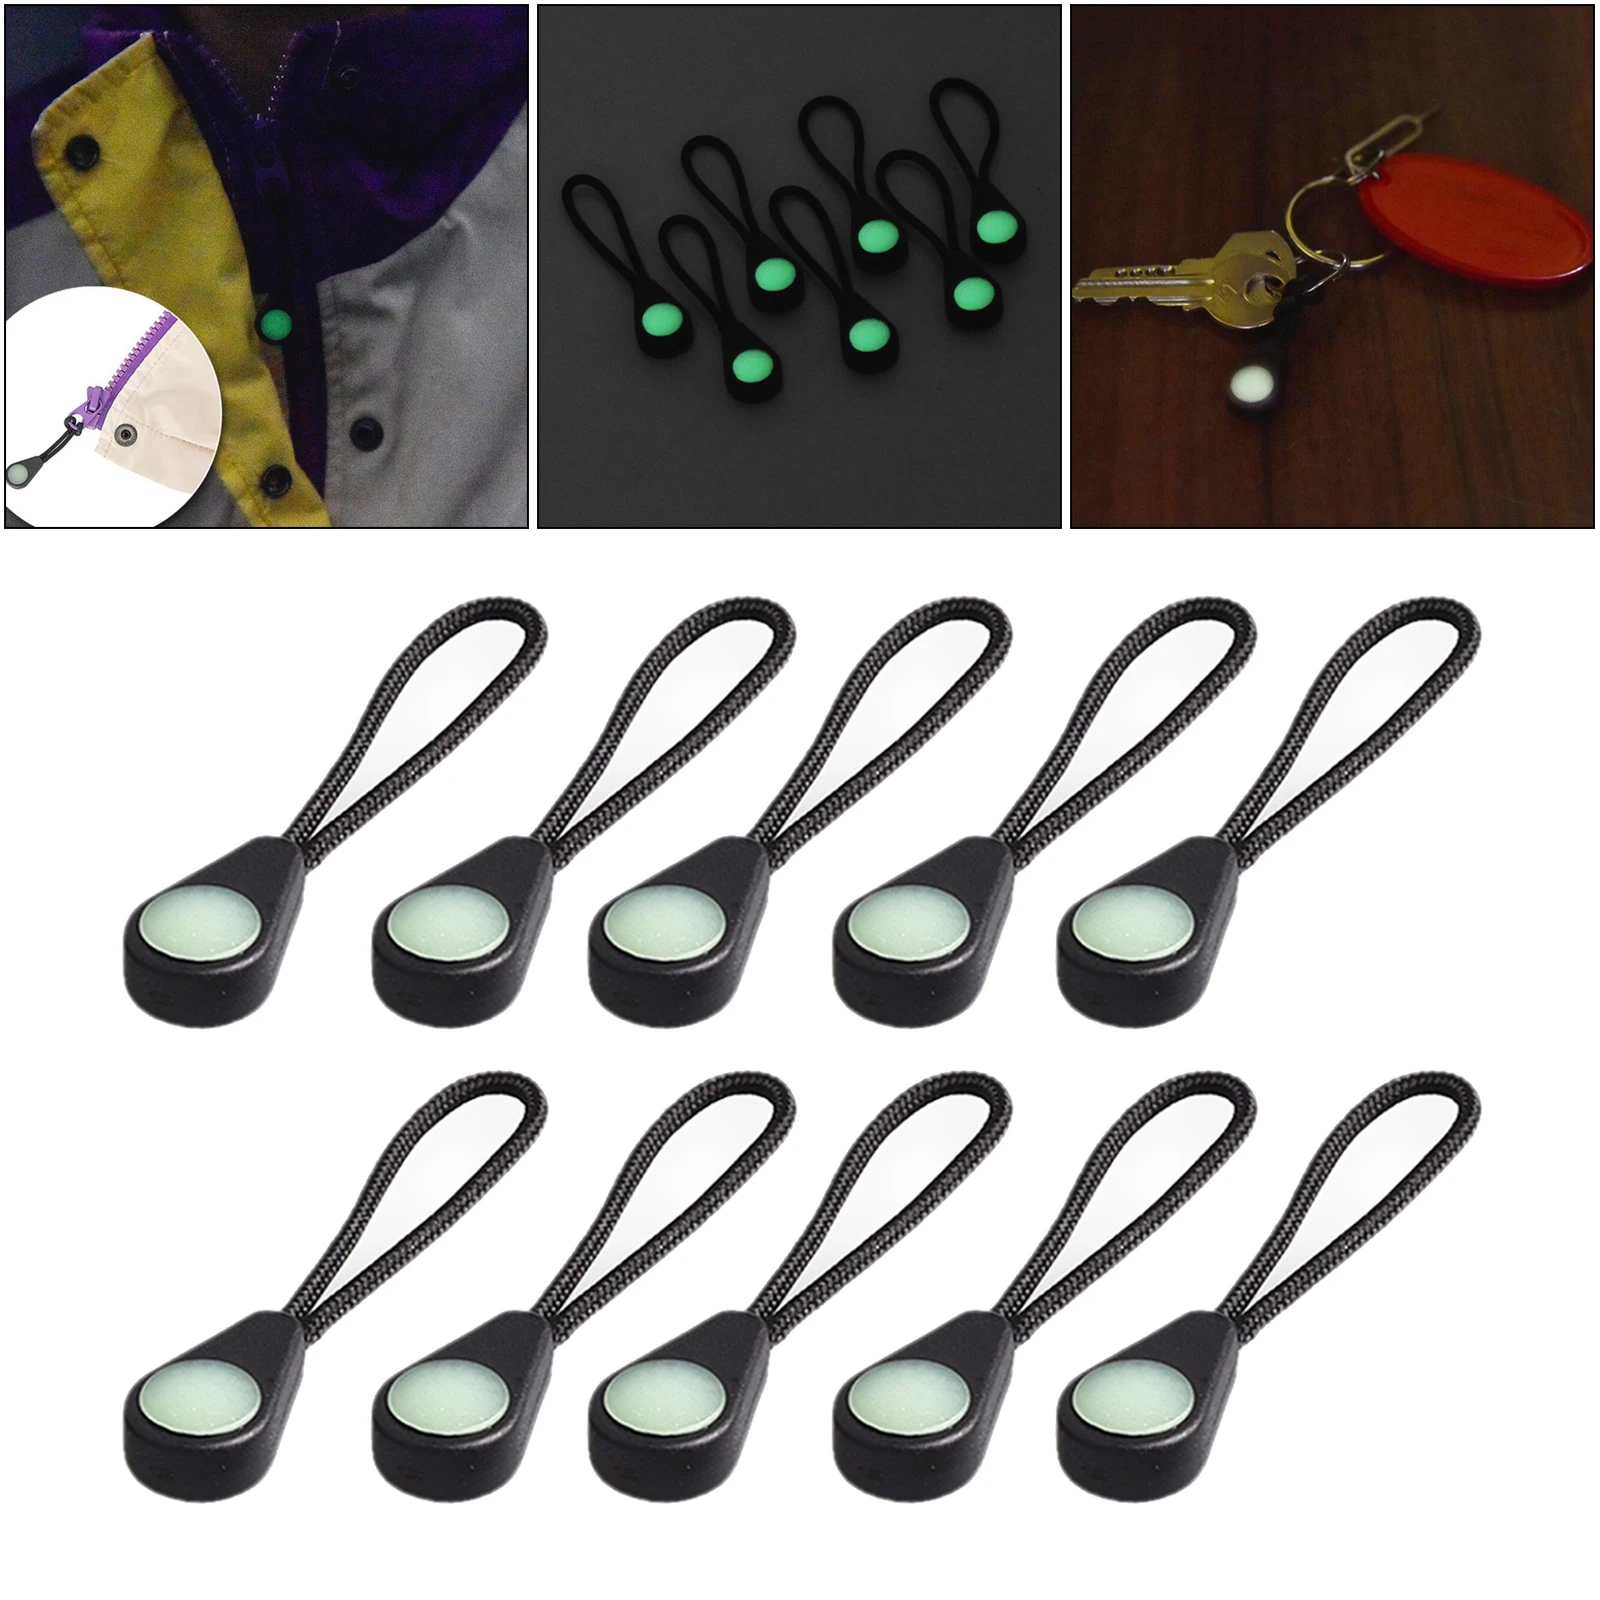 10Pack Luminous Zipper Puller Cord Zipper Tags Extension Zip for Luggage